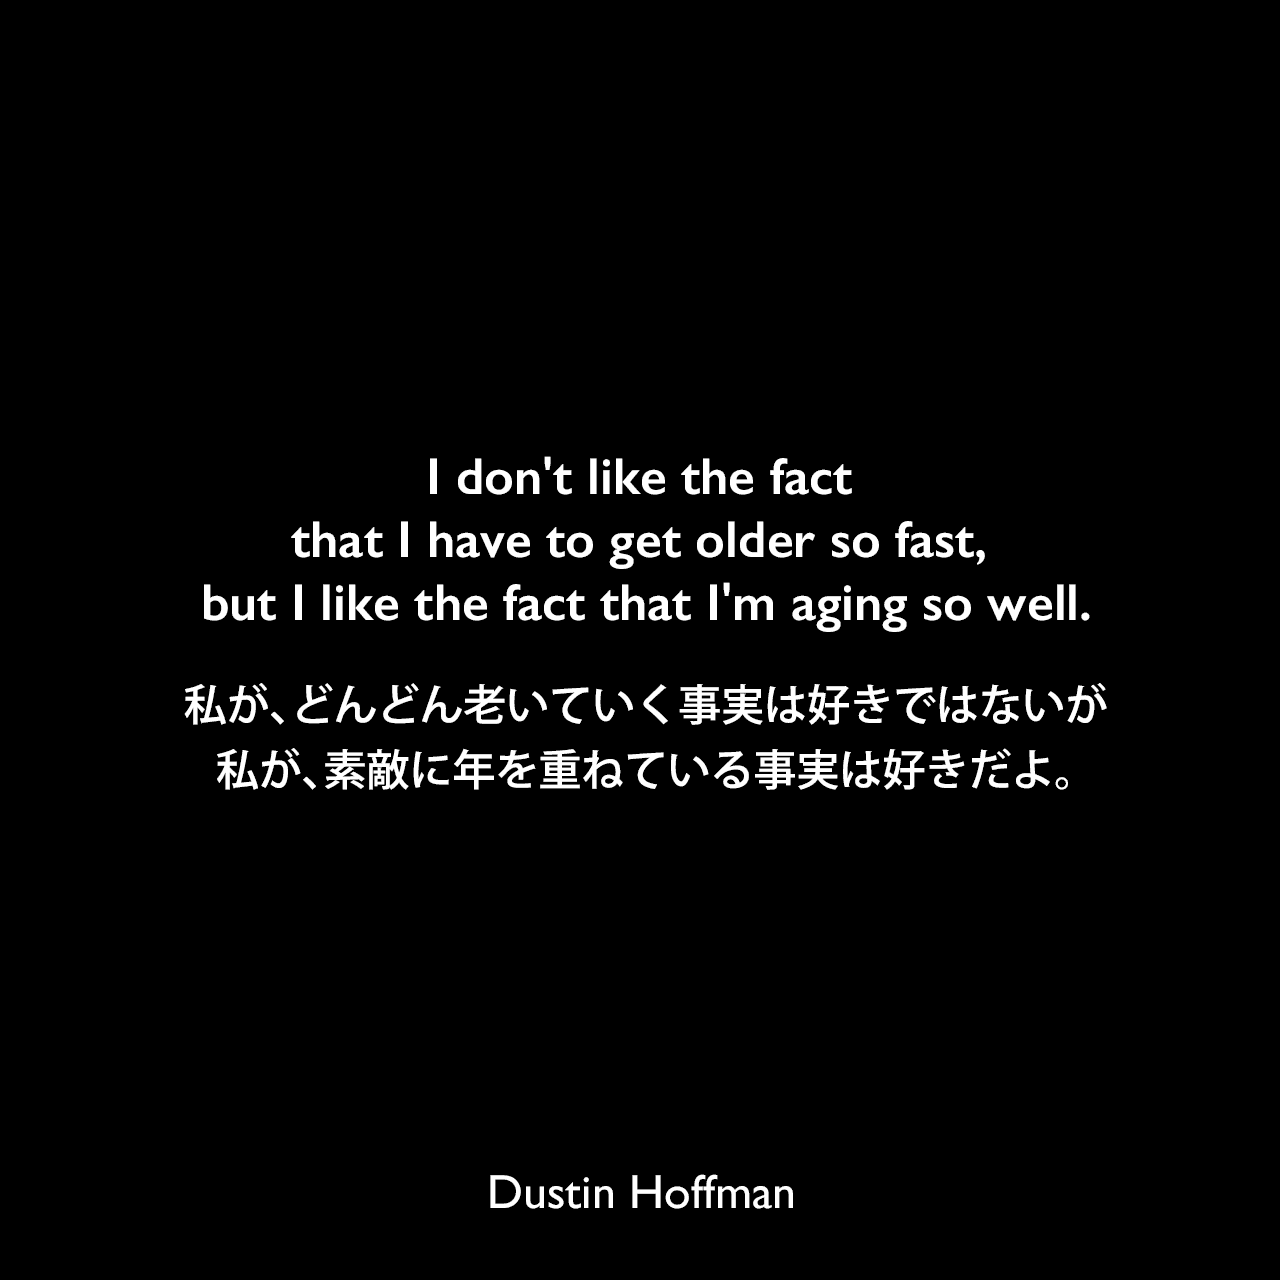 I don't like the fact that I have to get older so fast, but I like the fact that I'm aging so well.私が、どんどん老いていく事実は好きではないが、私が、素敵に年を重ねている事実は好きだよ。Dustin Hoffman